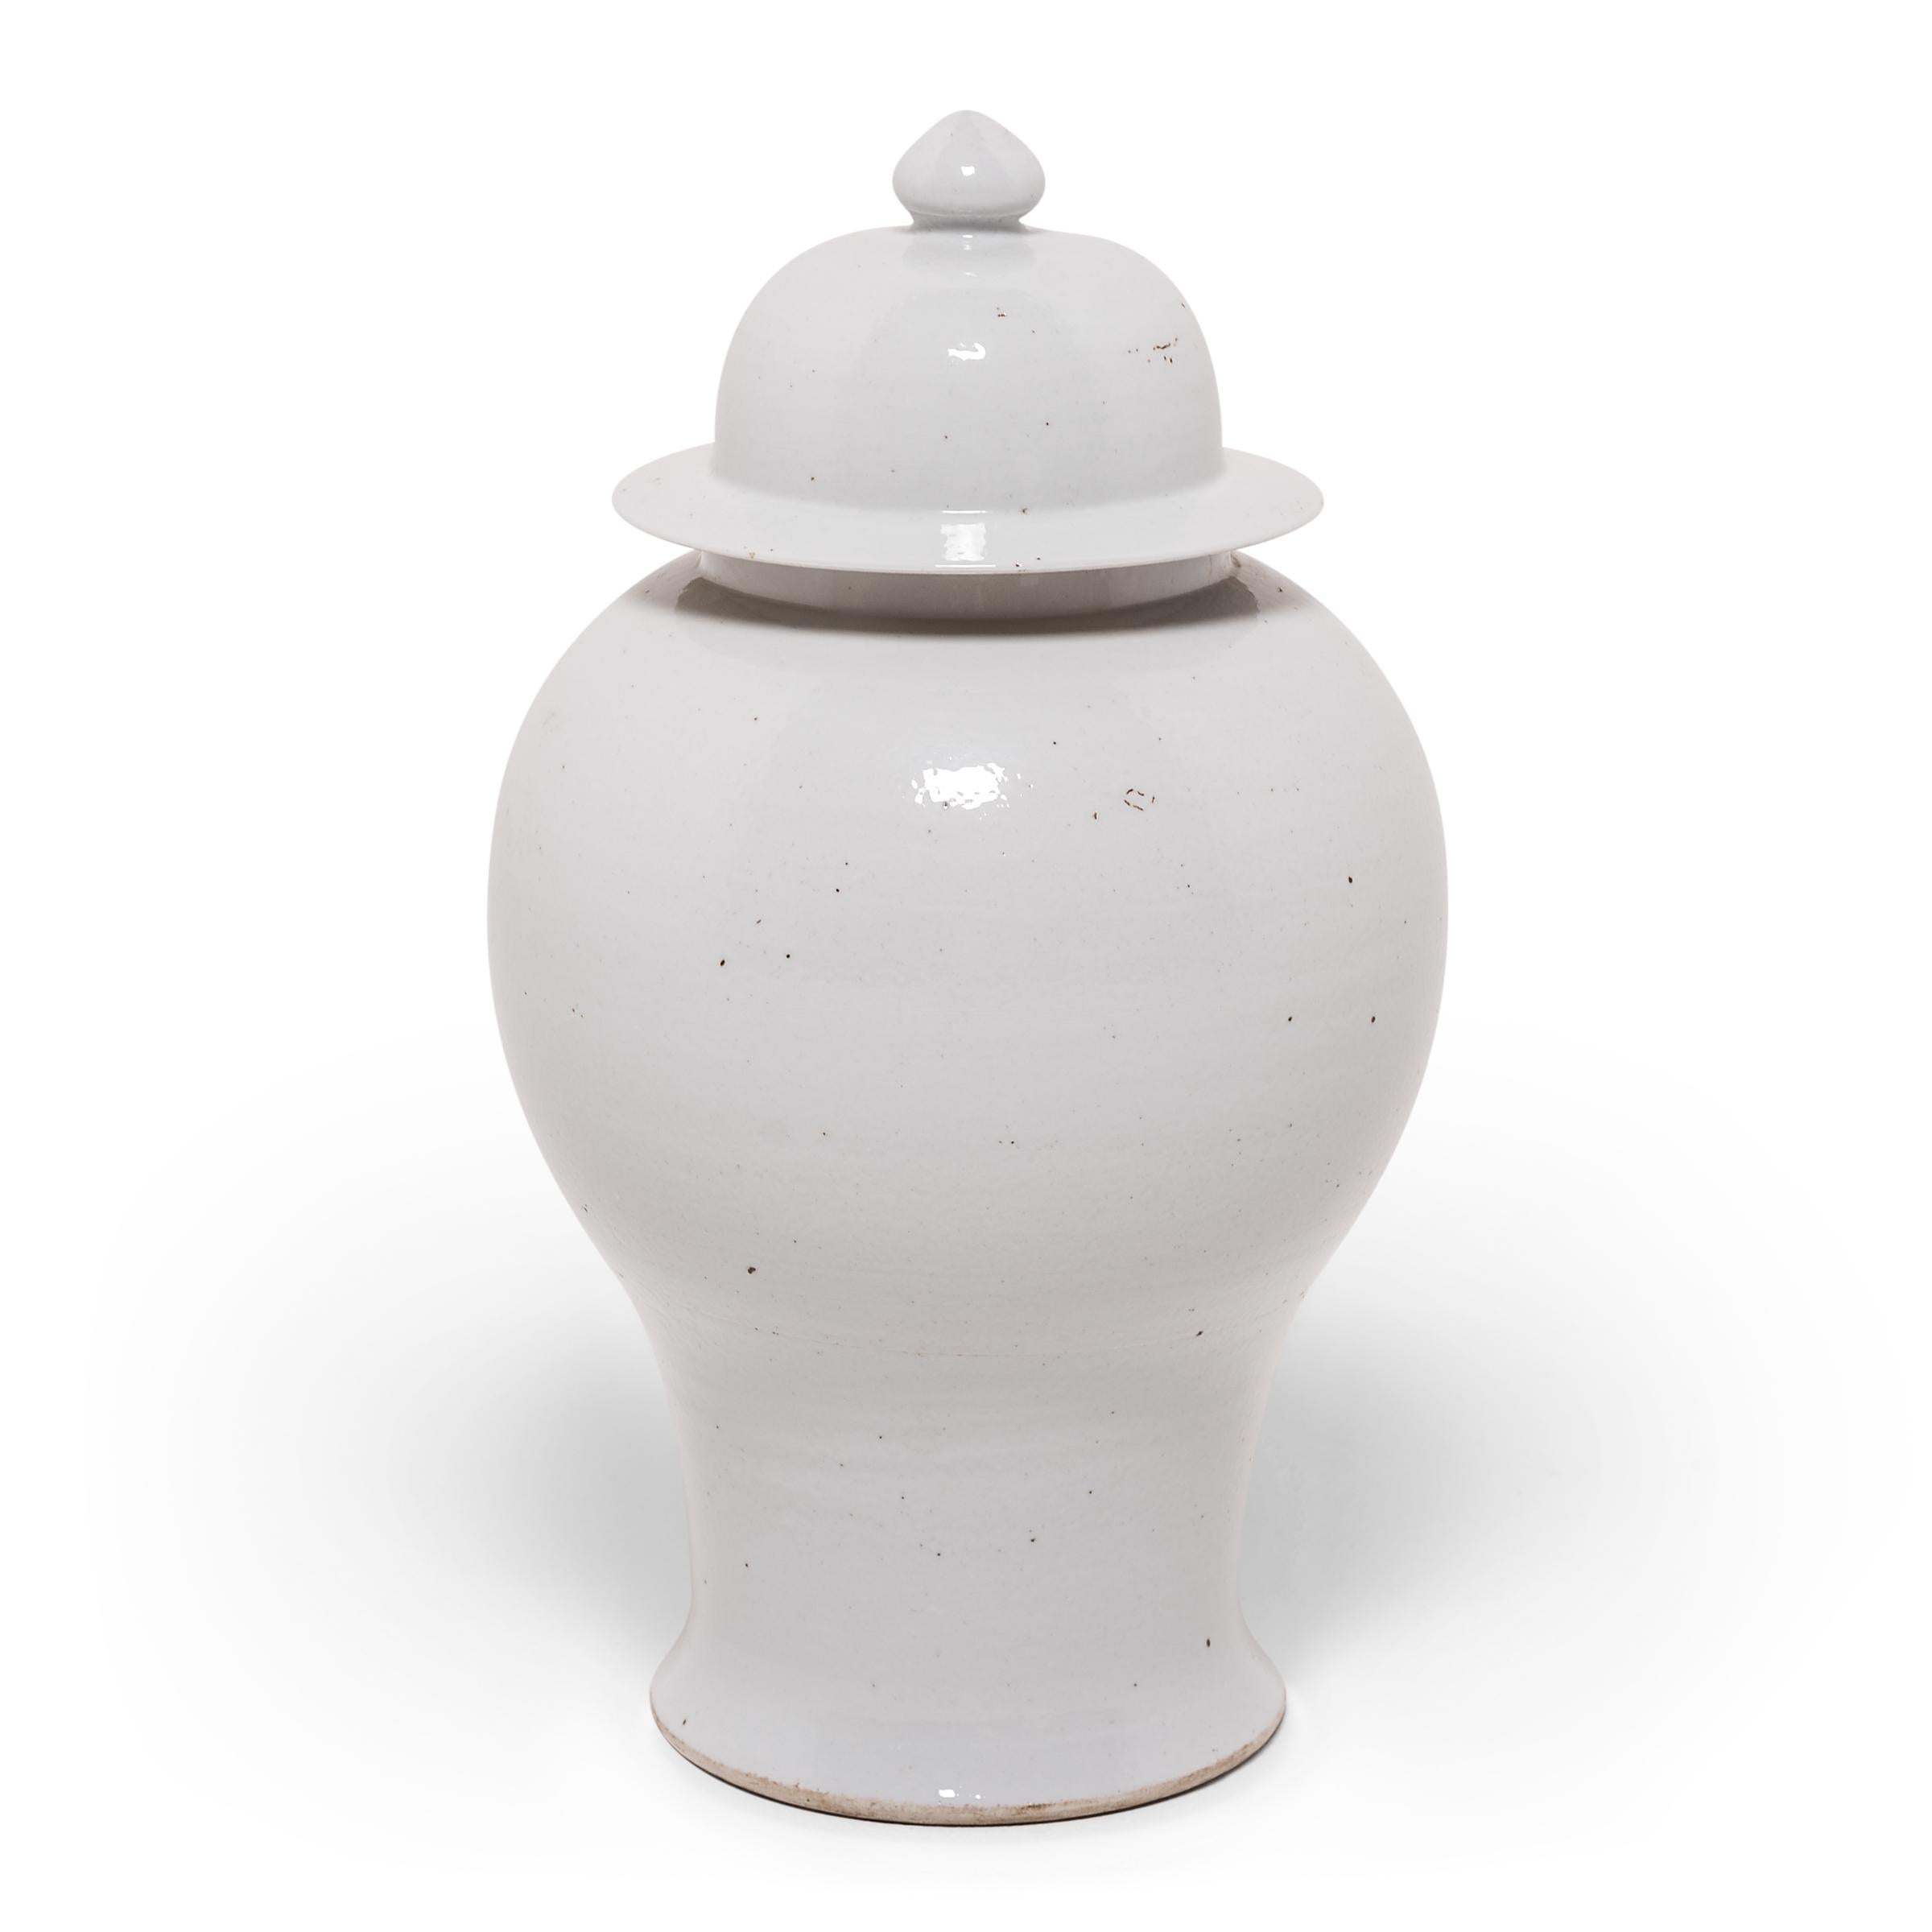 Defined by its rounded body, high shoulders, and domed lid, the time-honored Chinese baluster jar takes on a streamlined look in this contemporary interpretation made in Zhejiang province. Traditionally elaborately decorated, this modern take is